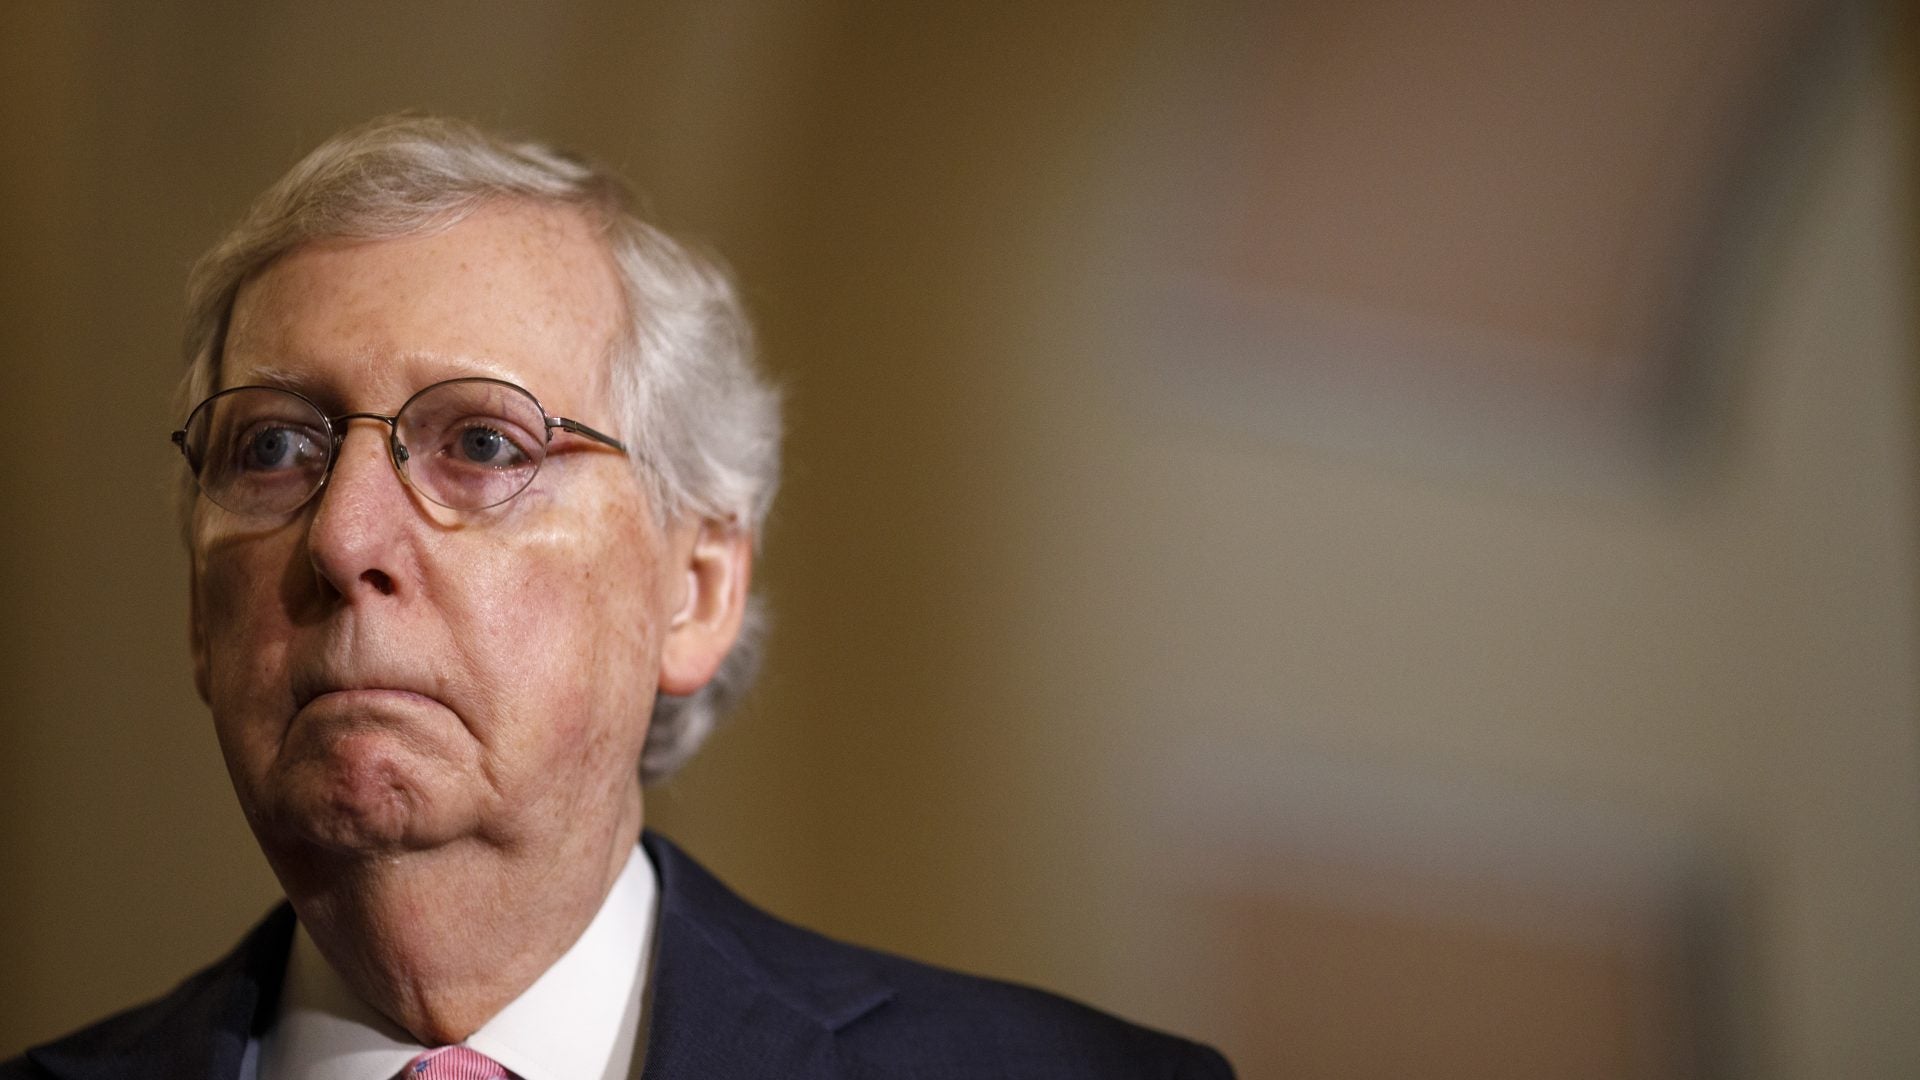 Twitter Rips Into Mitch McConnell For Calling Obama 'Classless'